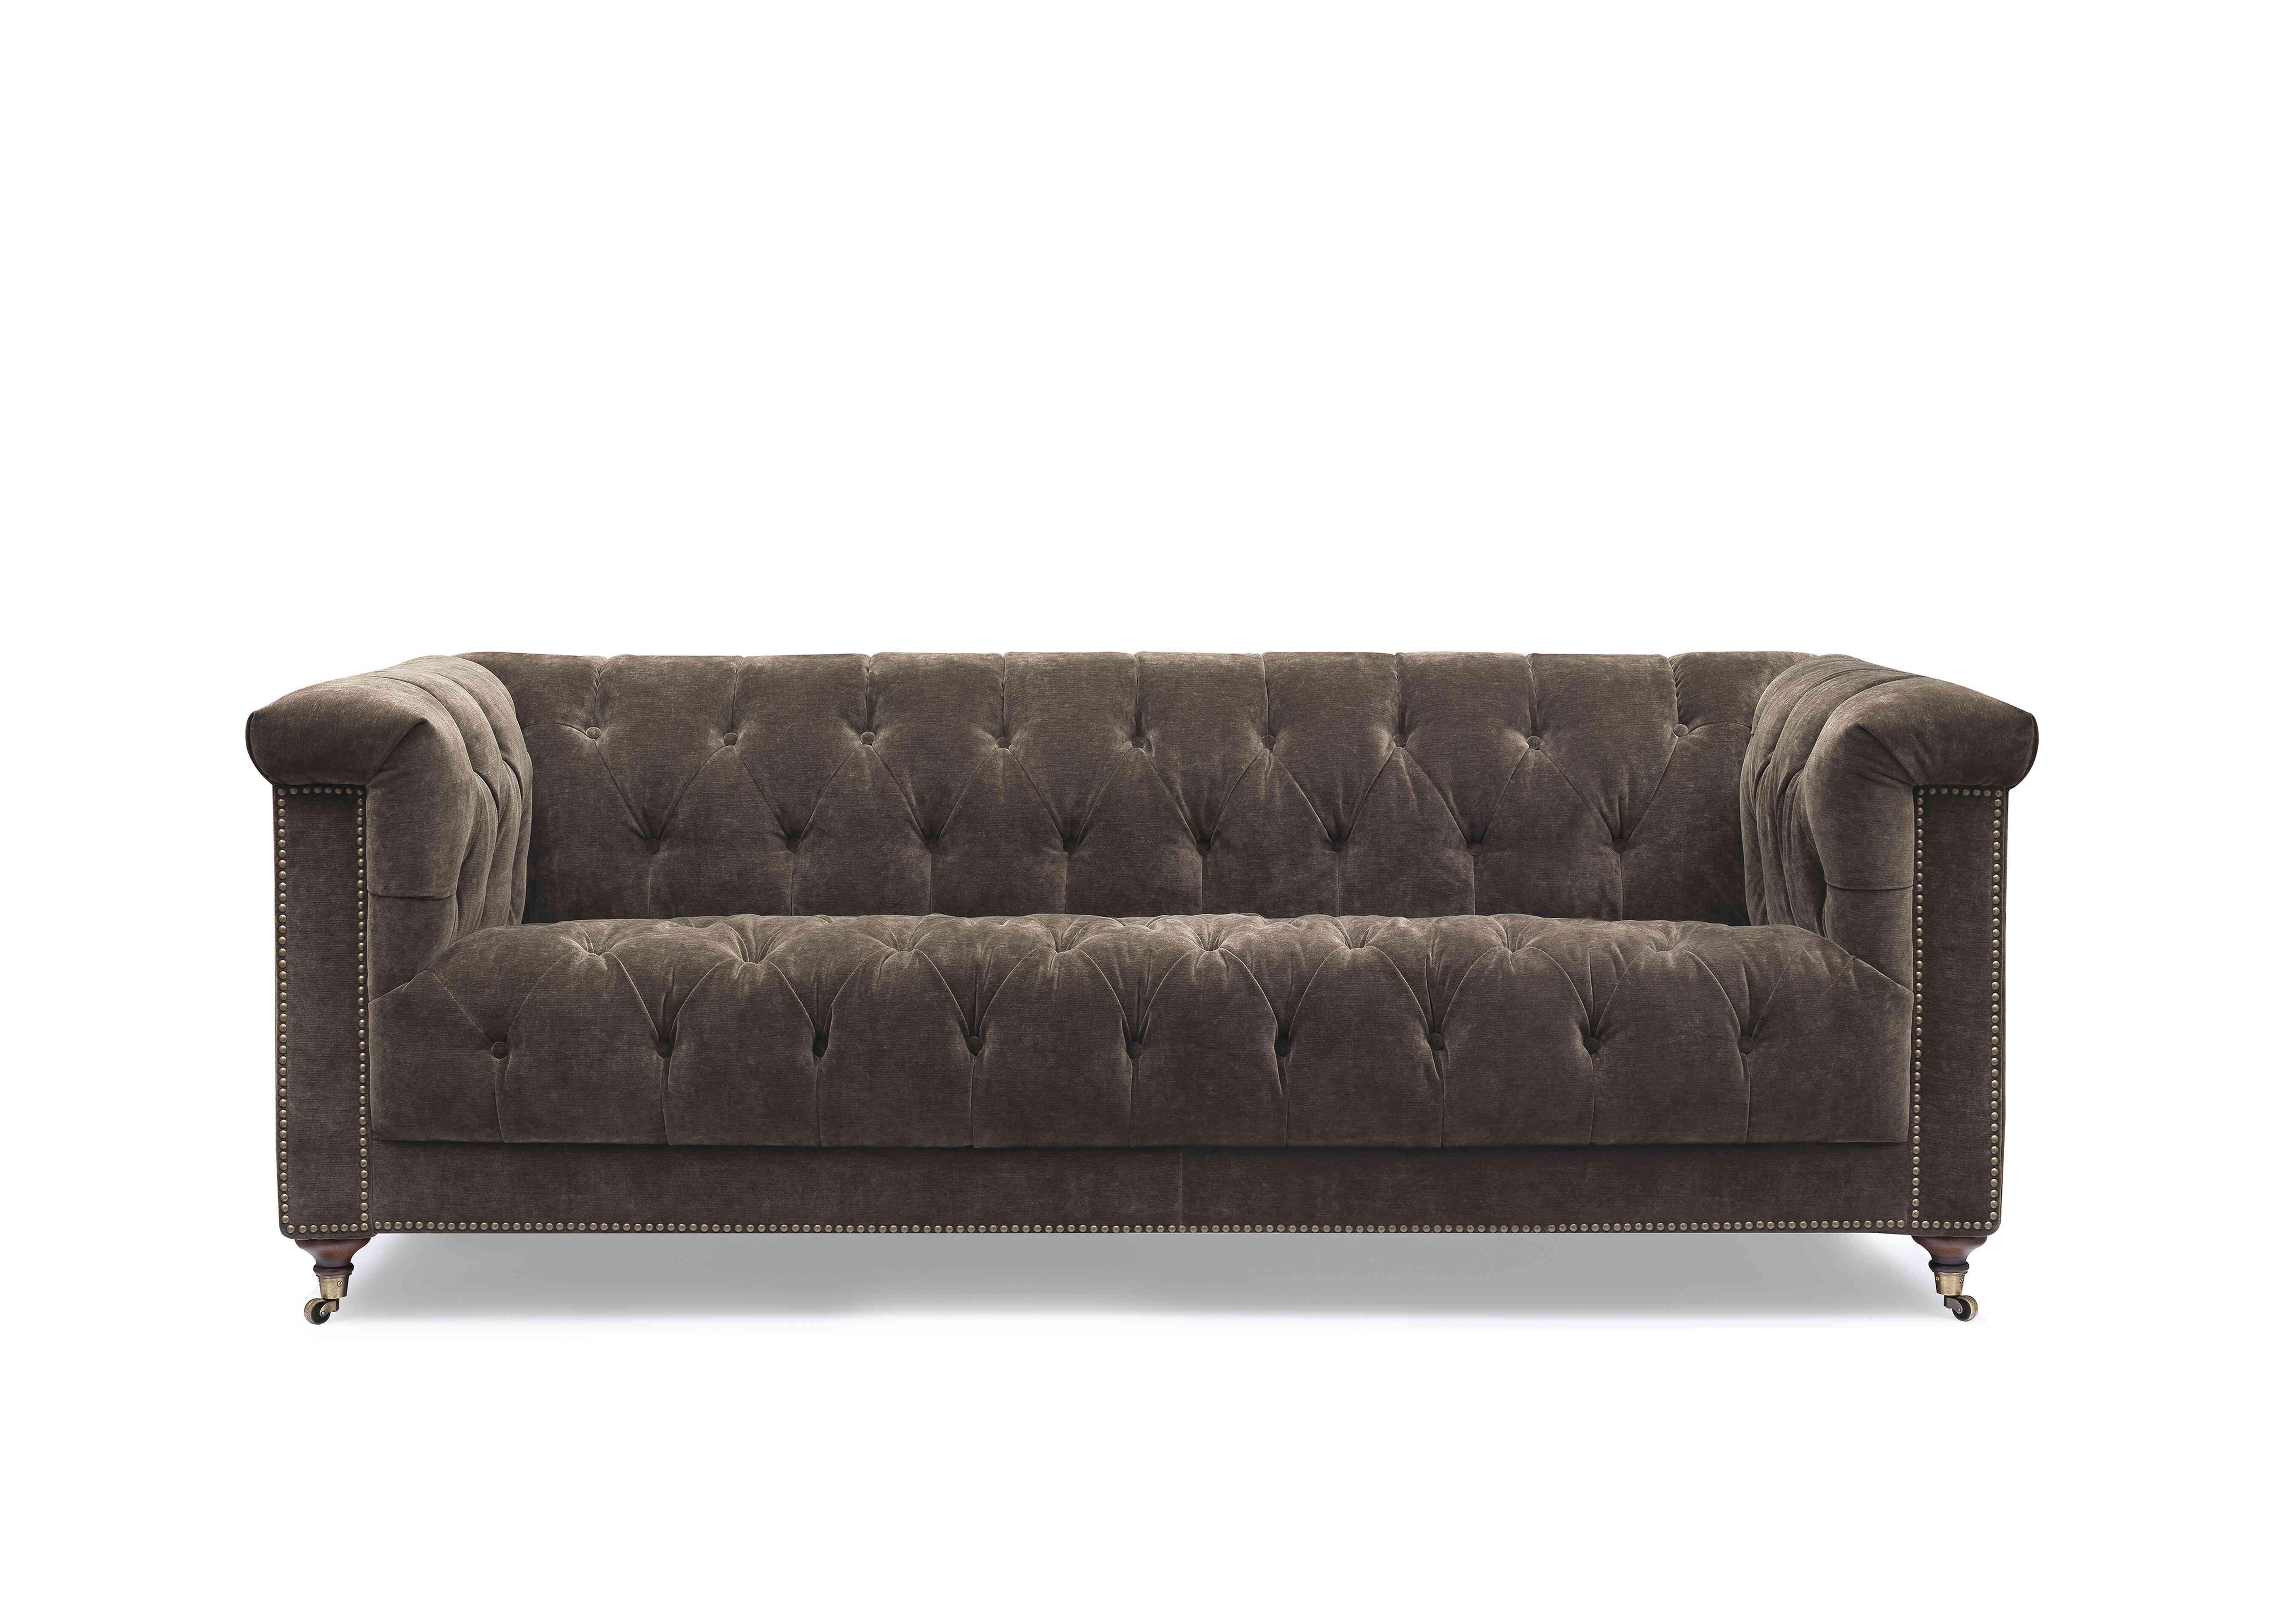 Wallace 3 Seater Fabric Chesterfield Sofa in X3y1-W020 Brindle on Furniture Village